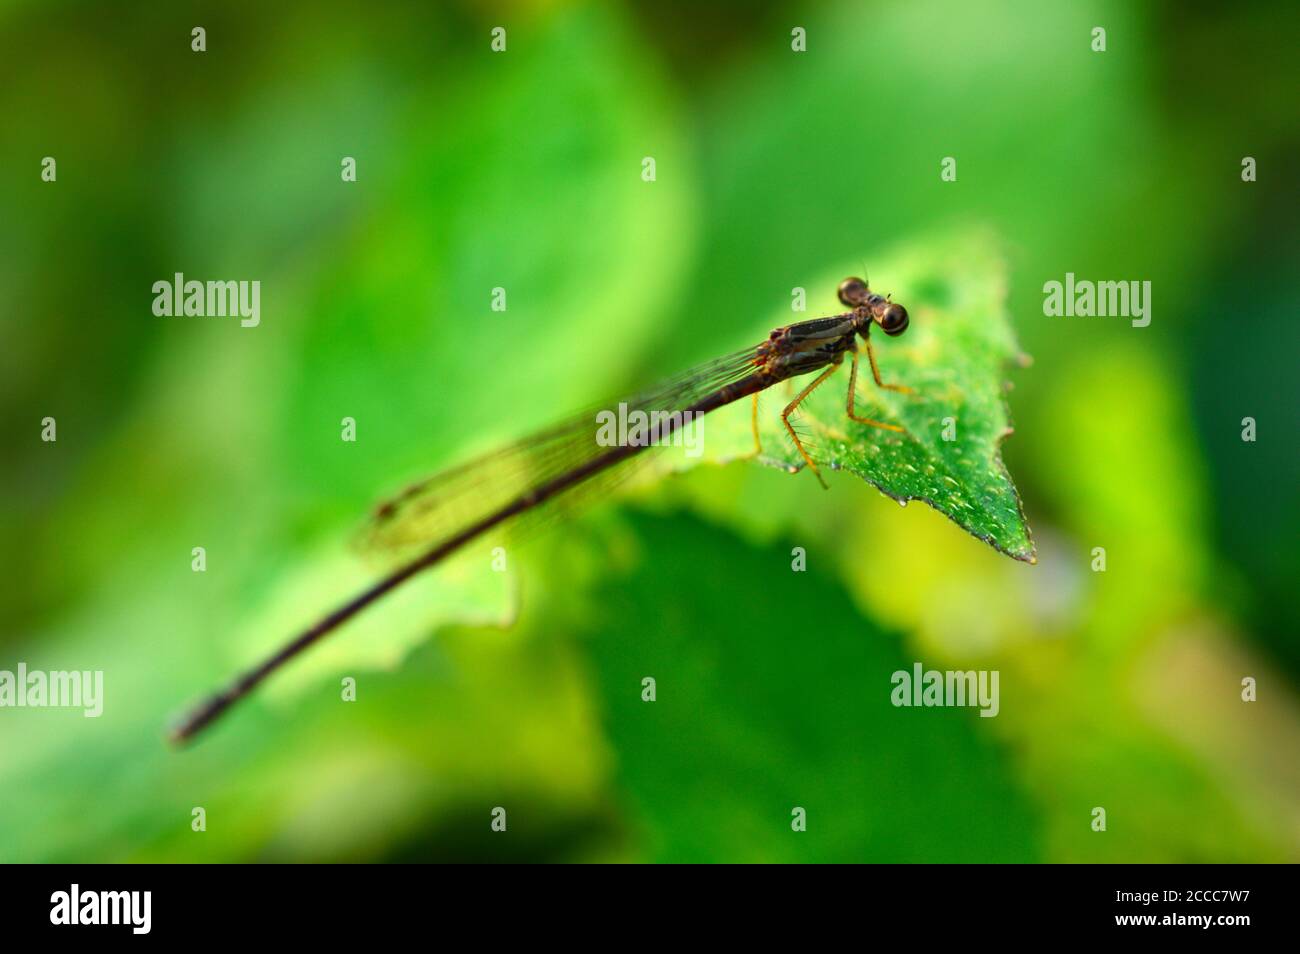 closeup of a dragonfly on a leaf with some parts in focus. A dragonfly is an insect belonging to the order Odonata, infraorder Anisoptera Stock Photo